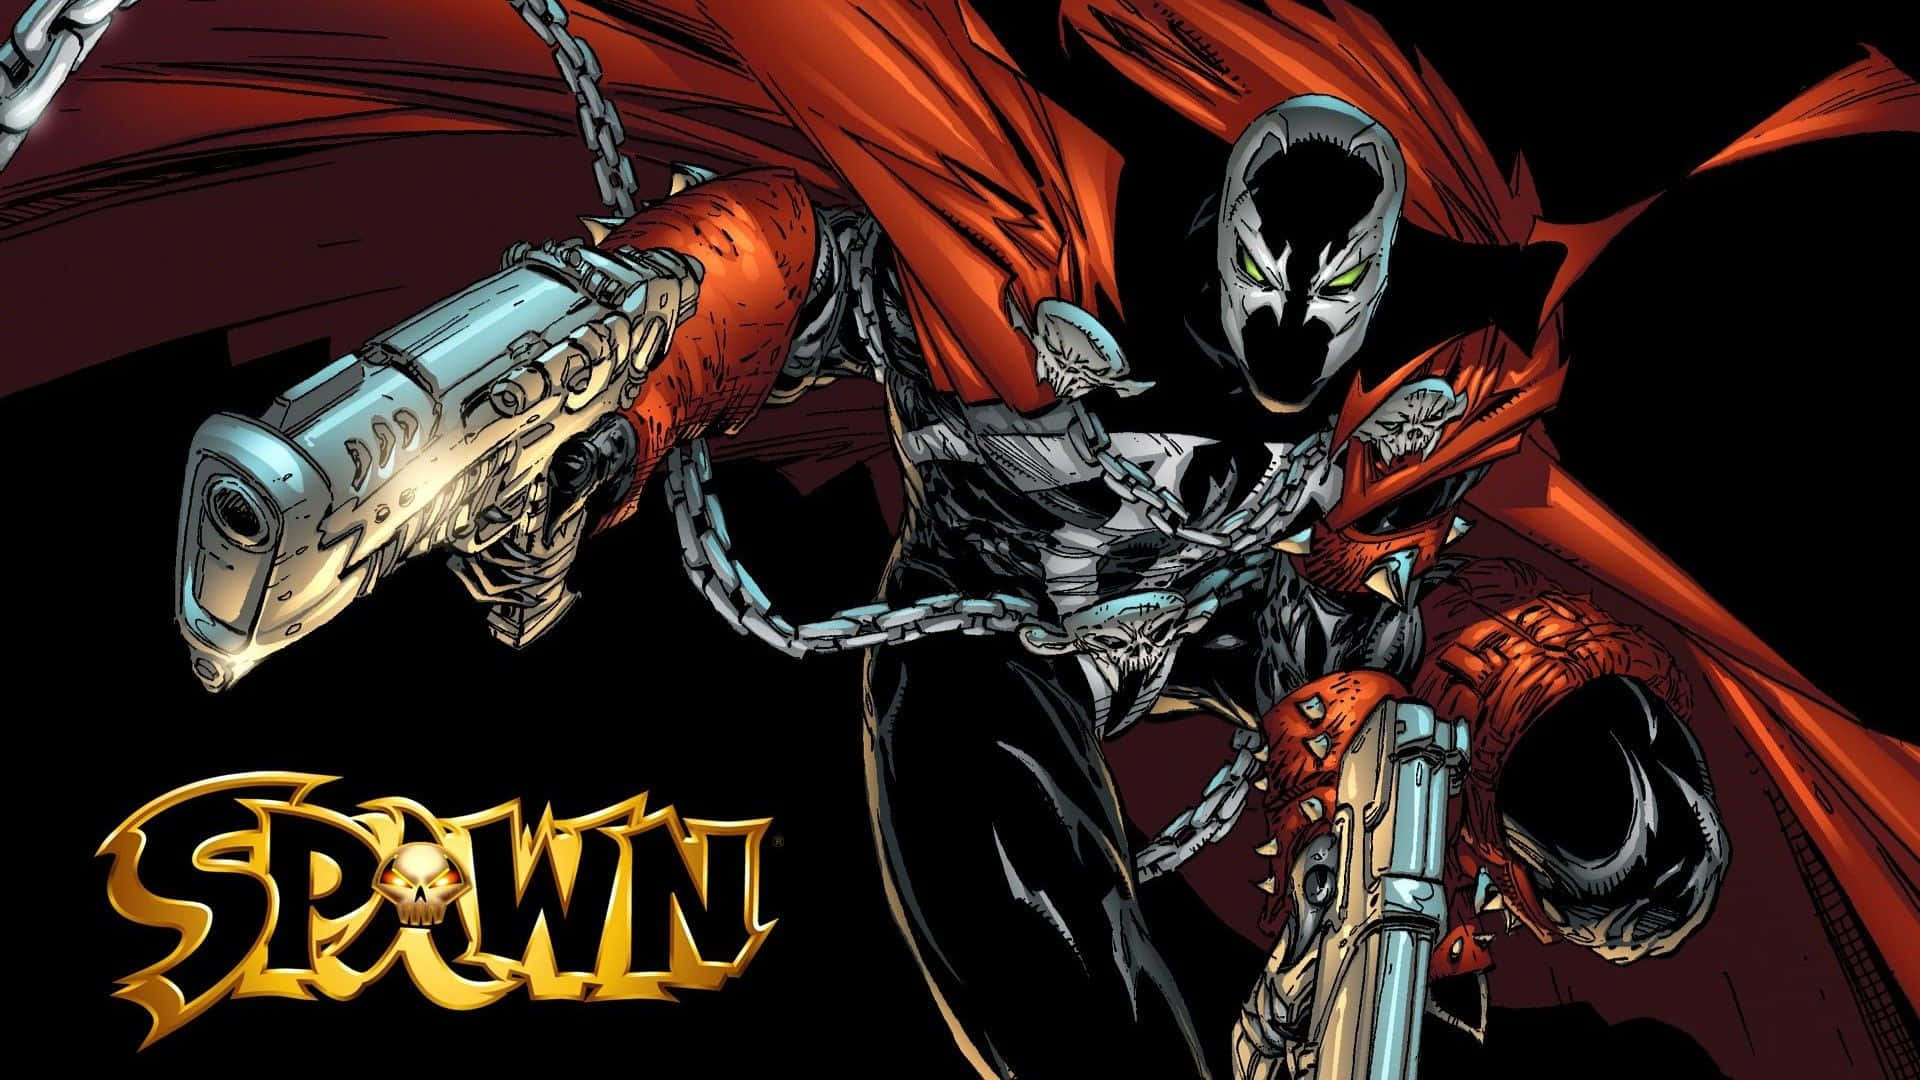 a comic book cover with the word spawn Wallpaper